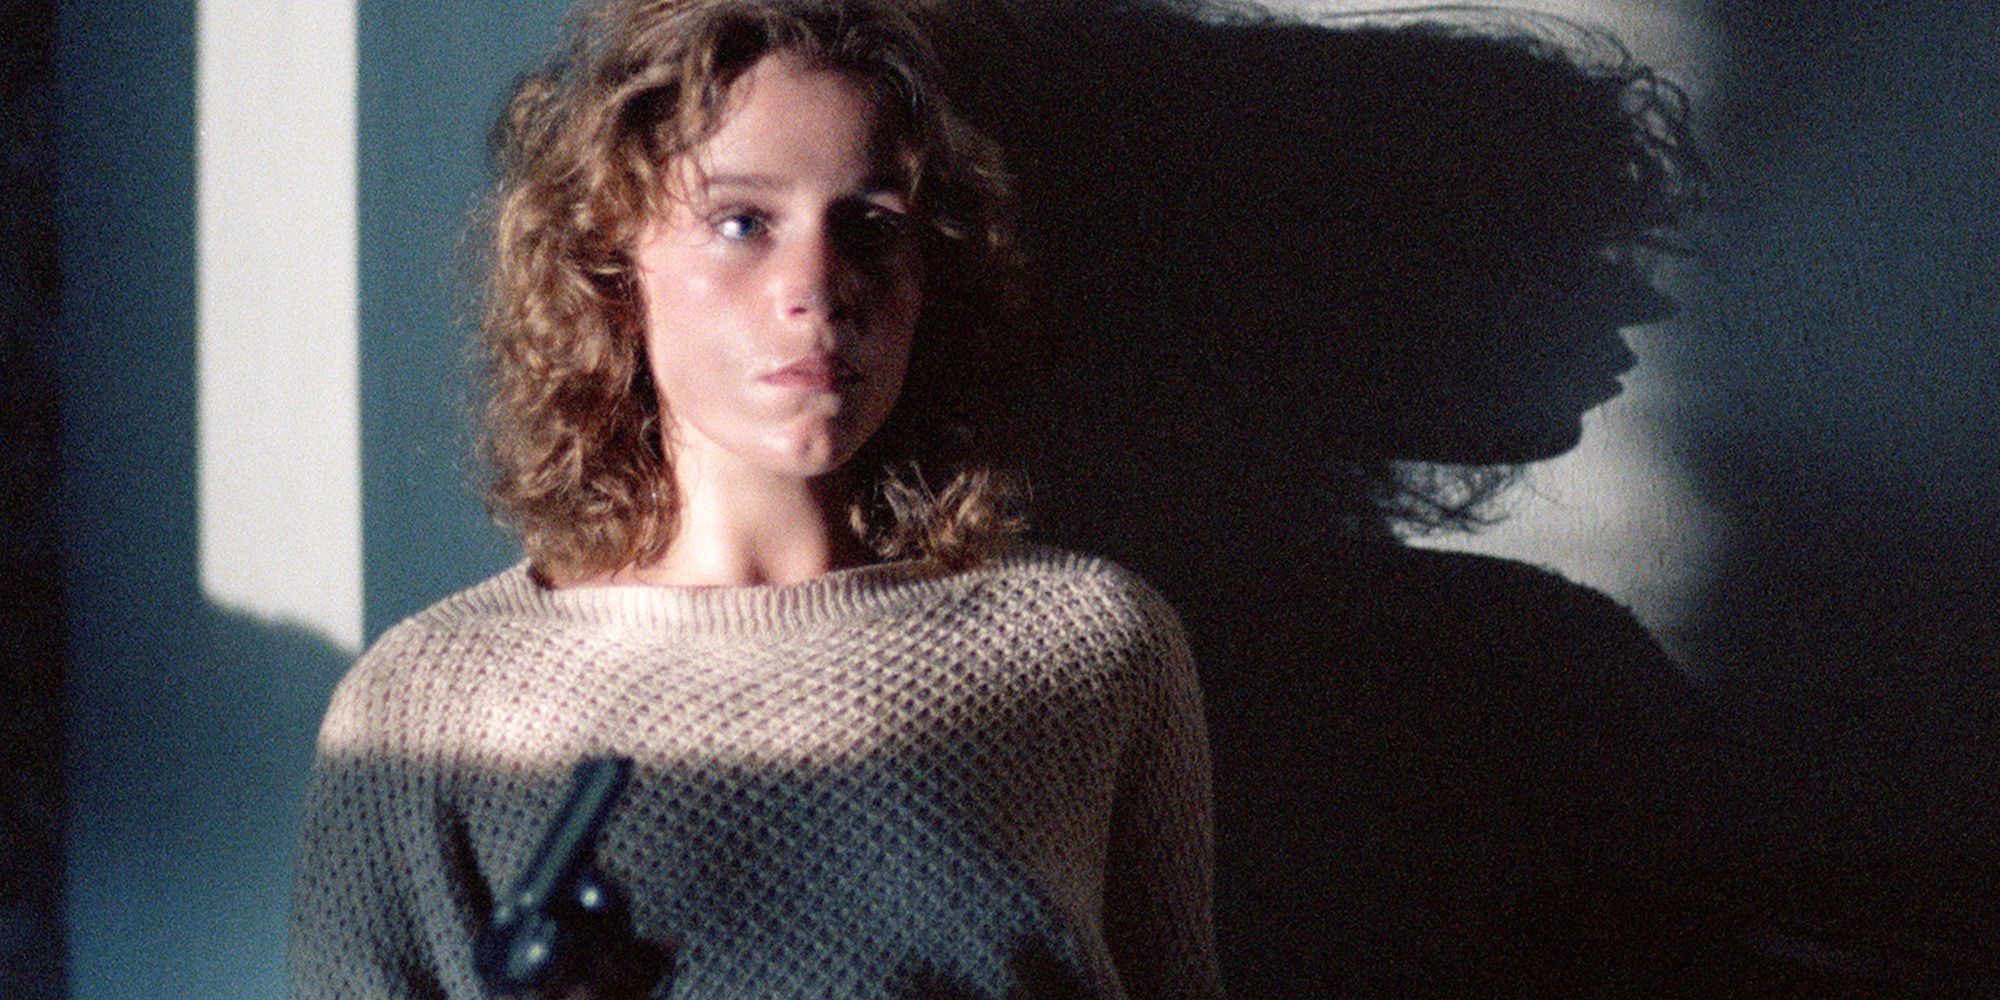 Abby holding a gun and looking scared in Blood Simple